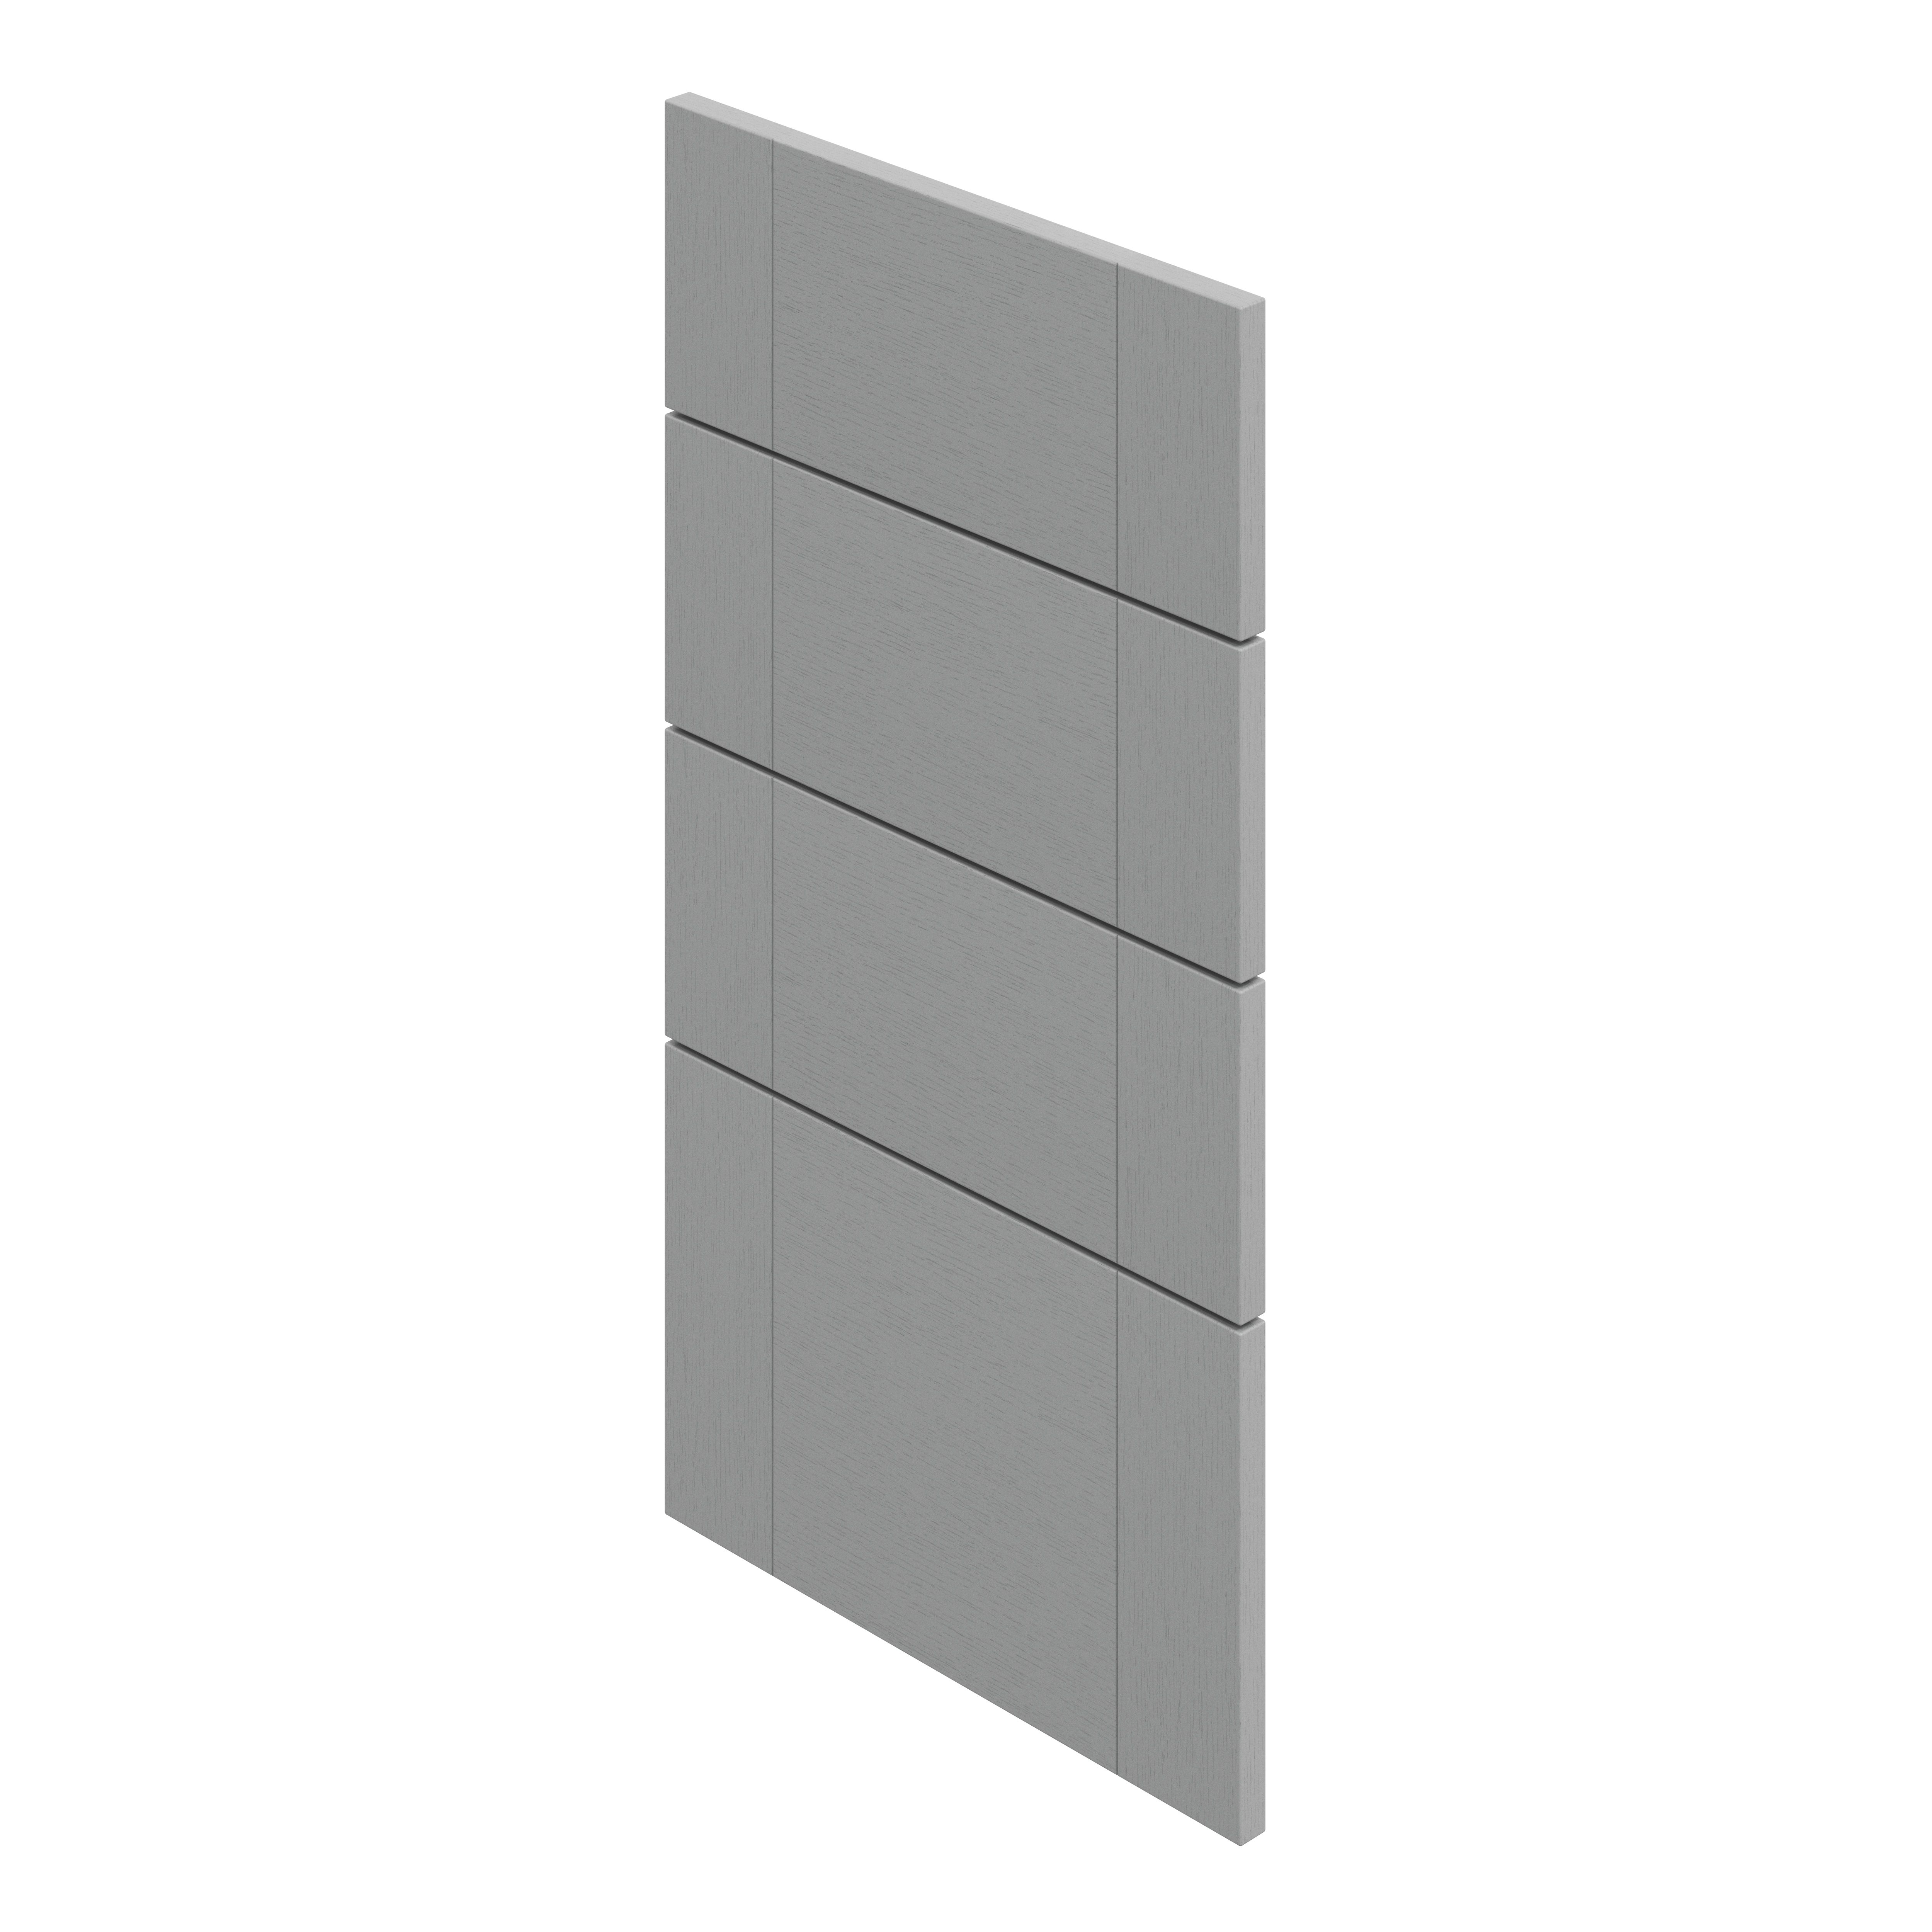 GoodHome Alpinia Matt Slate Grey Painted Wood Effect Shaker Drawer front (W)400mm, Pack of 4